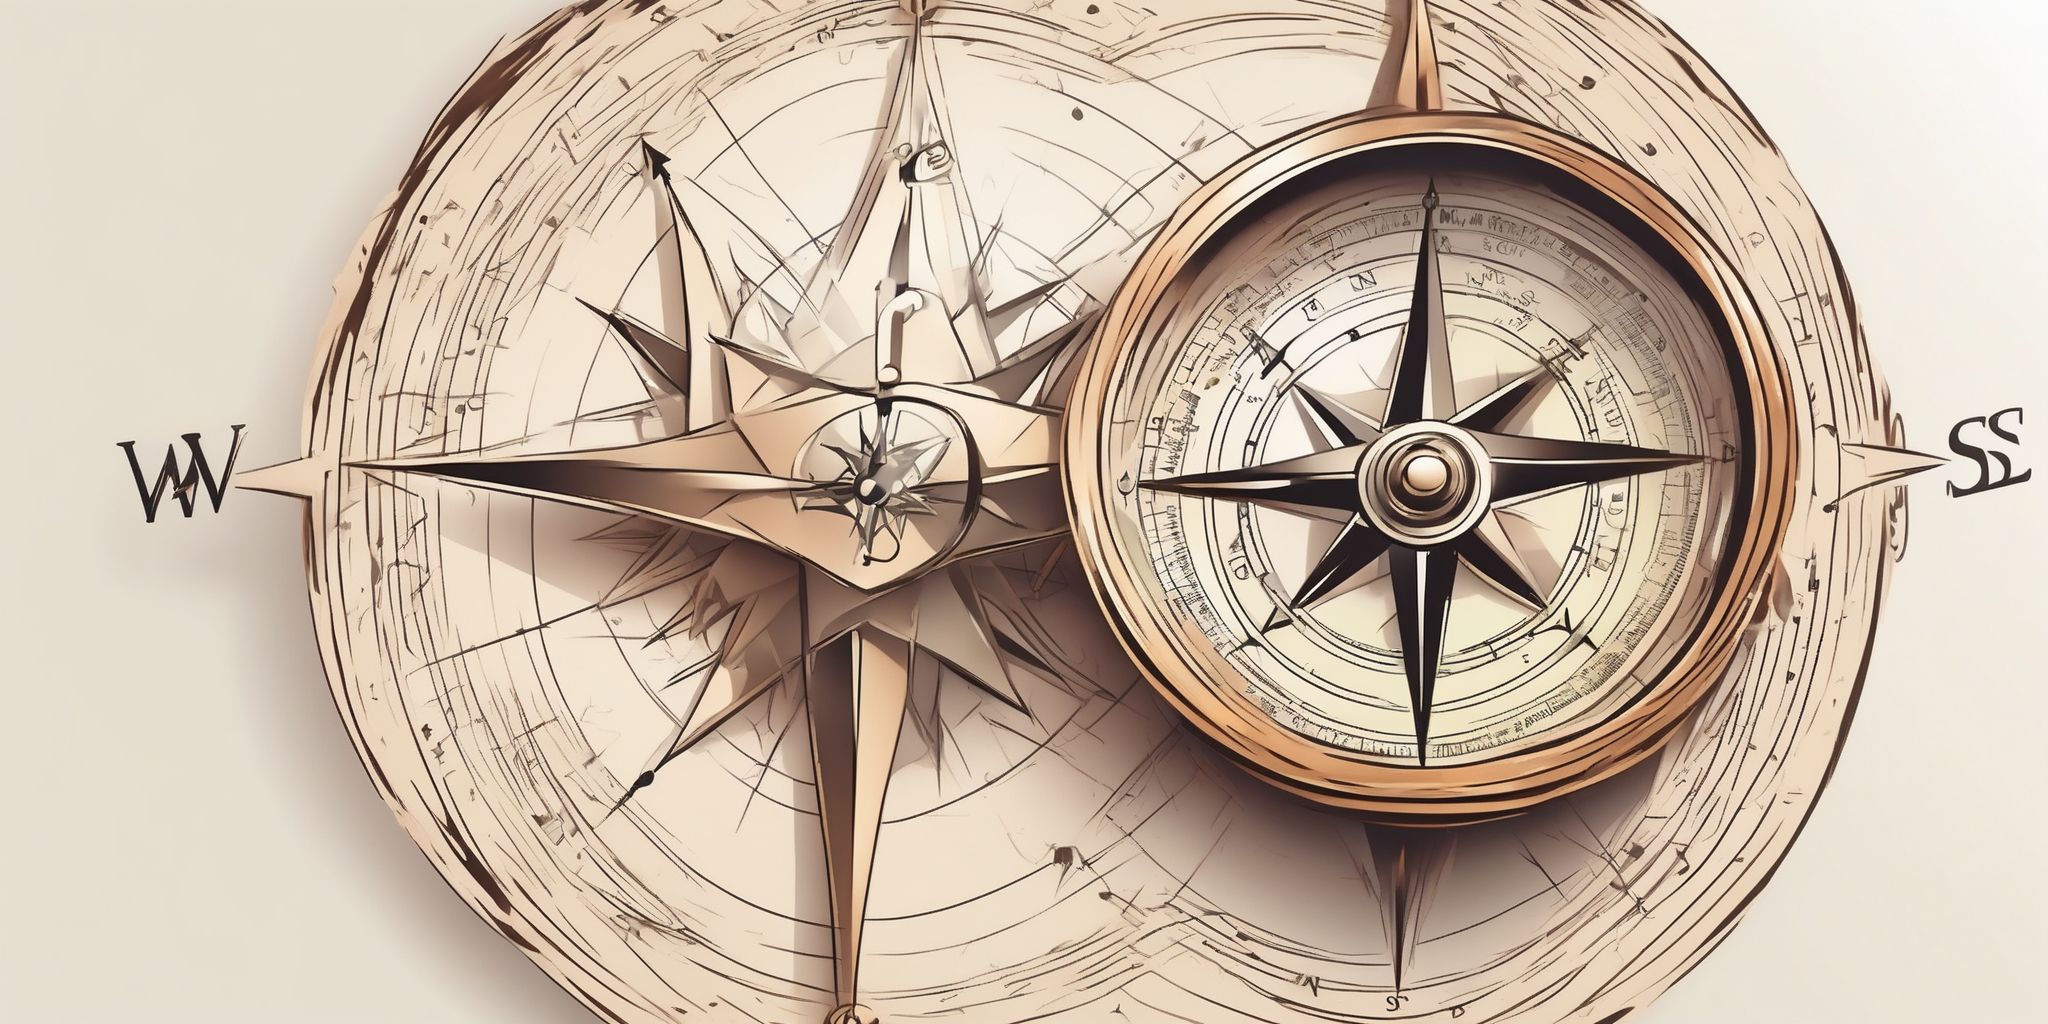 Compass in illustration style with gradients and white background